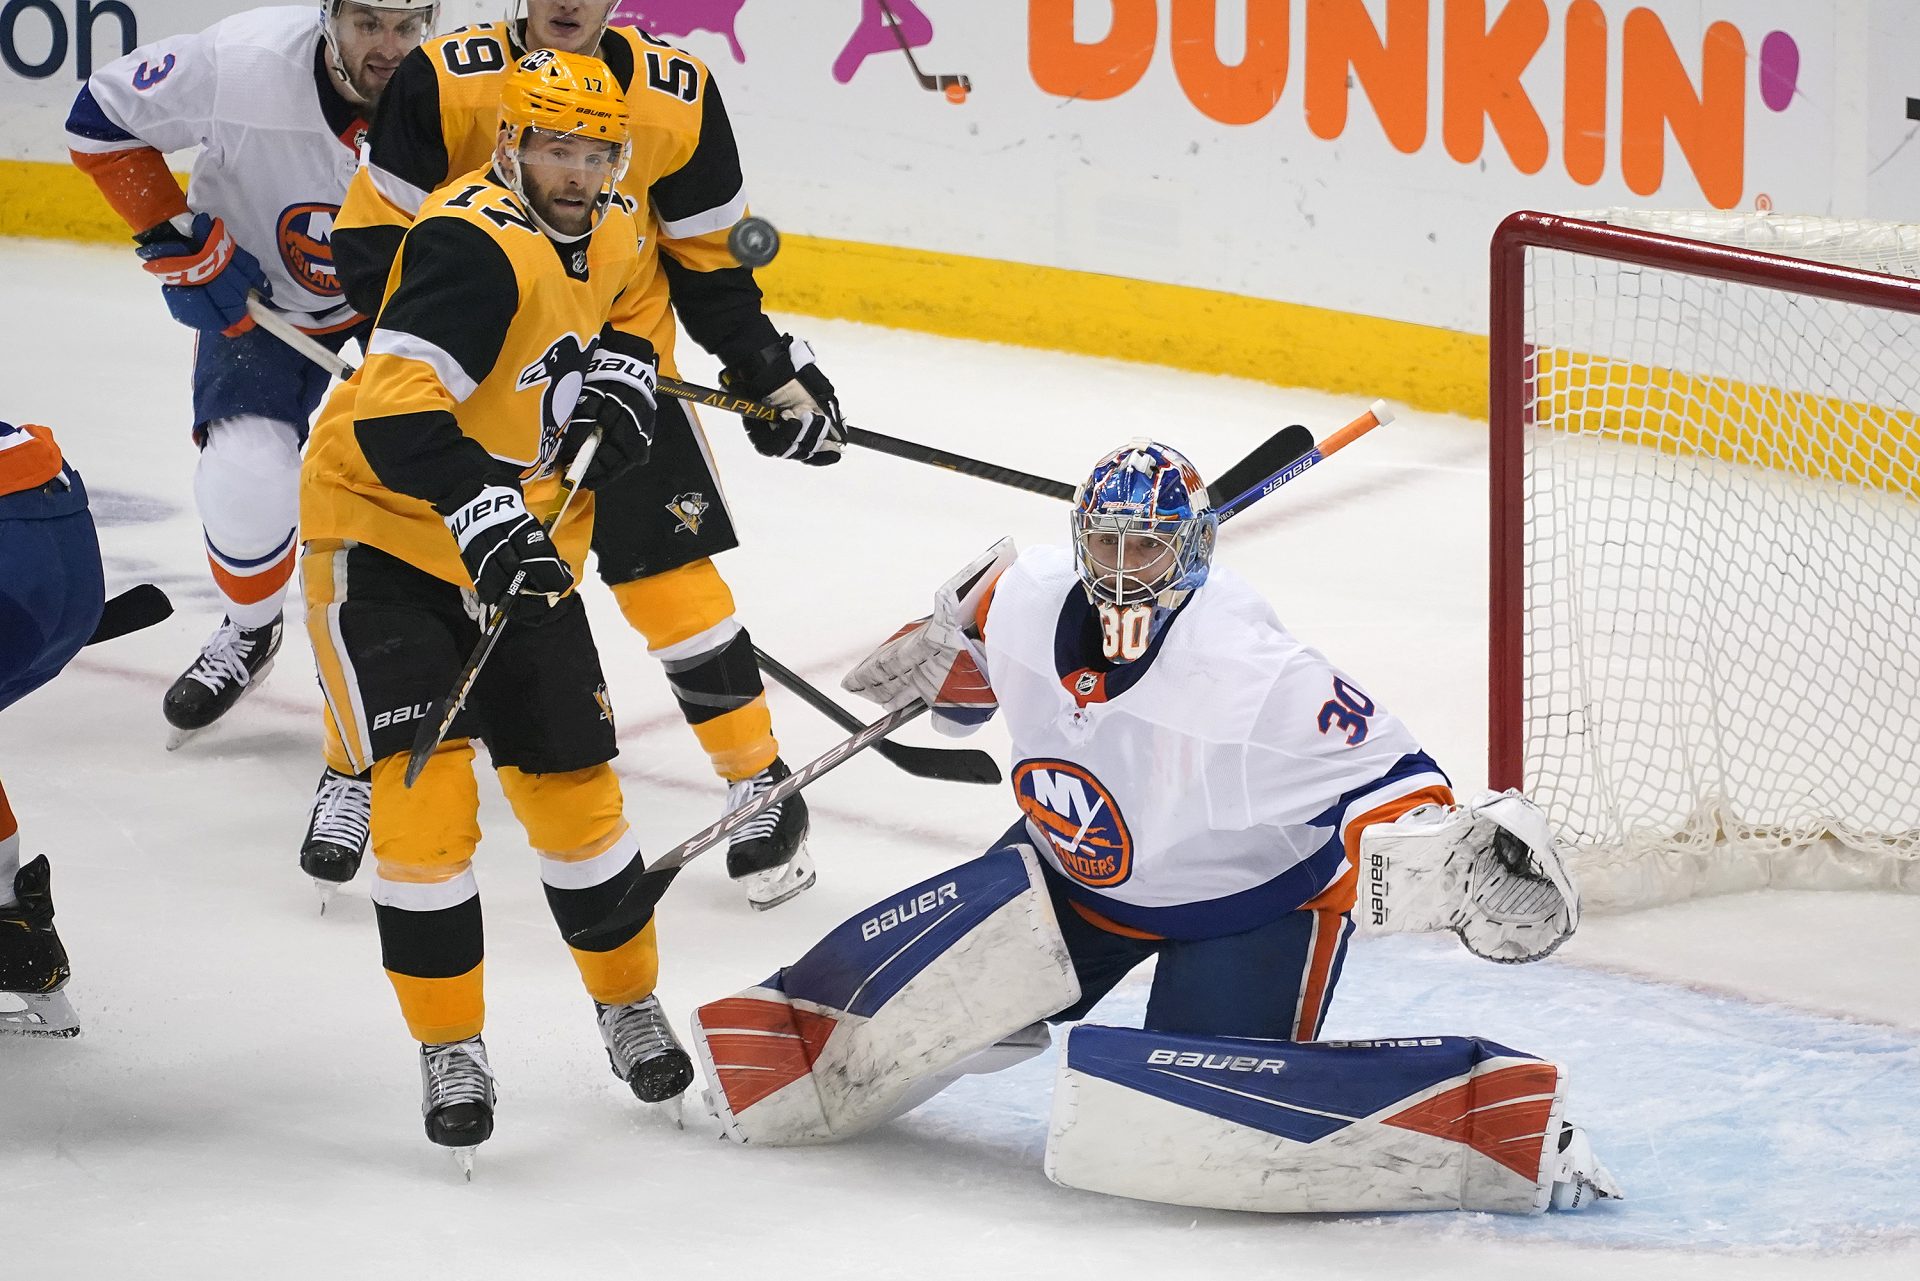 New York Islanders goaltender Ilya Sorokin (30) watches the puck with Pittsburgh Penguins' Bryan Rust (17) looking for a deflection during the first period in Game 5 of an NHL hockey Stanley Cup first-round playoff series in Pittsburgh, Monday, May 24, 2021.